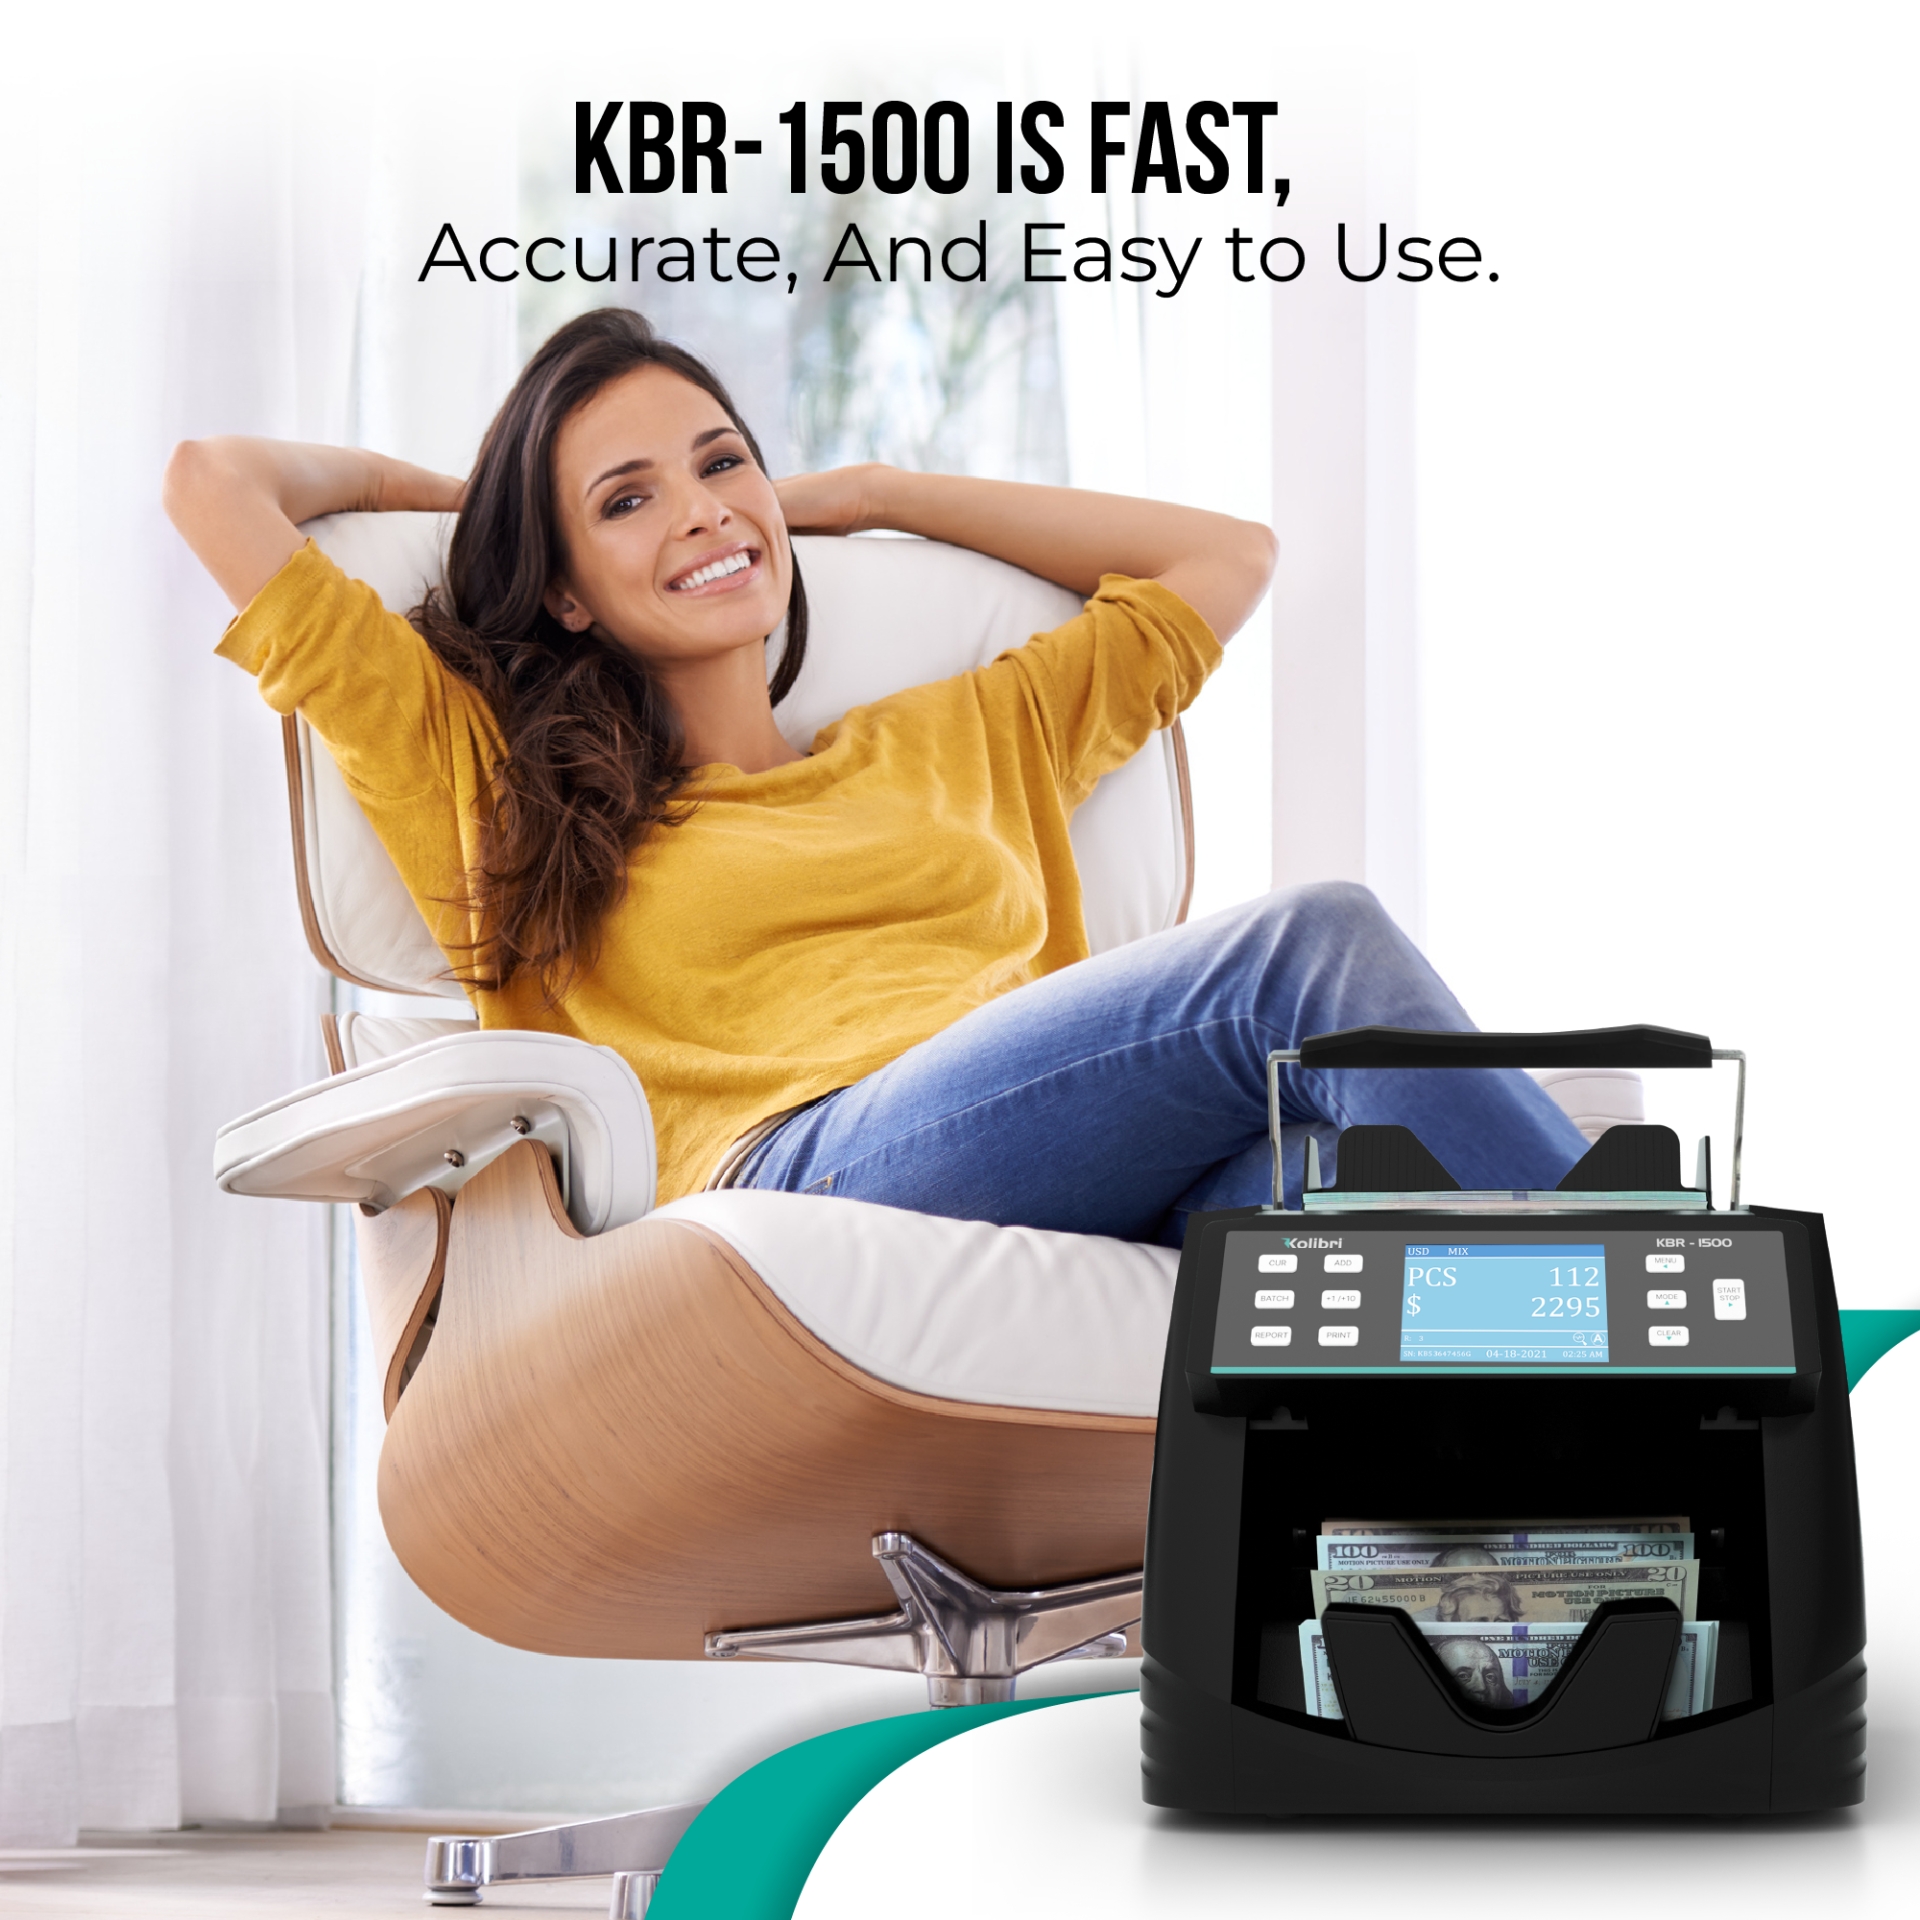 KBR-1500 is Fast, Accurate, and Easy to Use